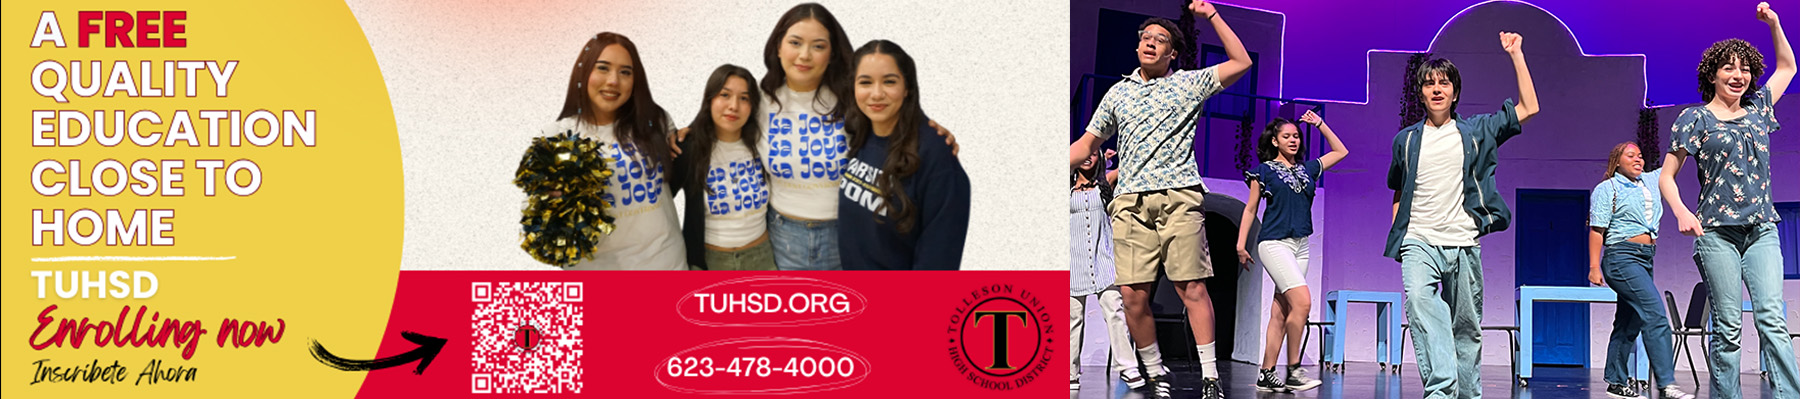 A free quality education close to home - TUHSD Enrolling now | Inscribete Ahora - tuhsd.org - 623-478-4000 | Group of students holding certificates